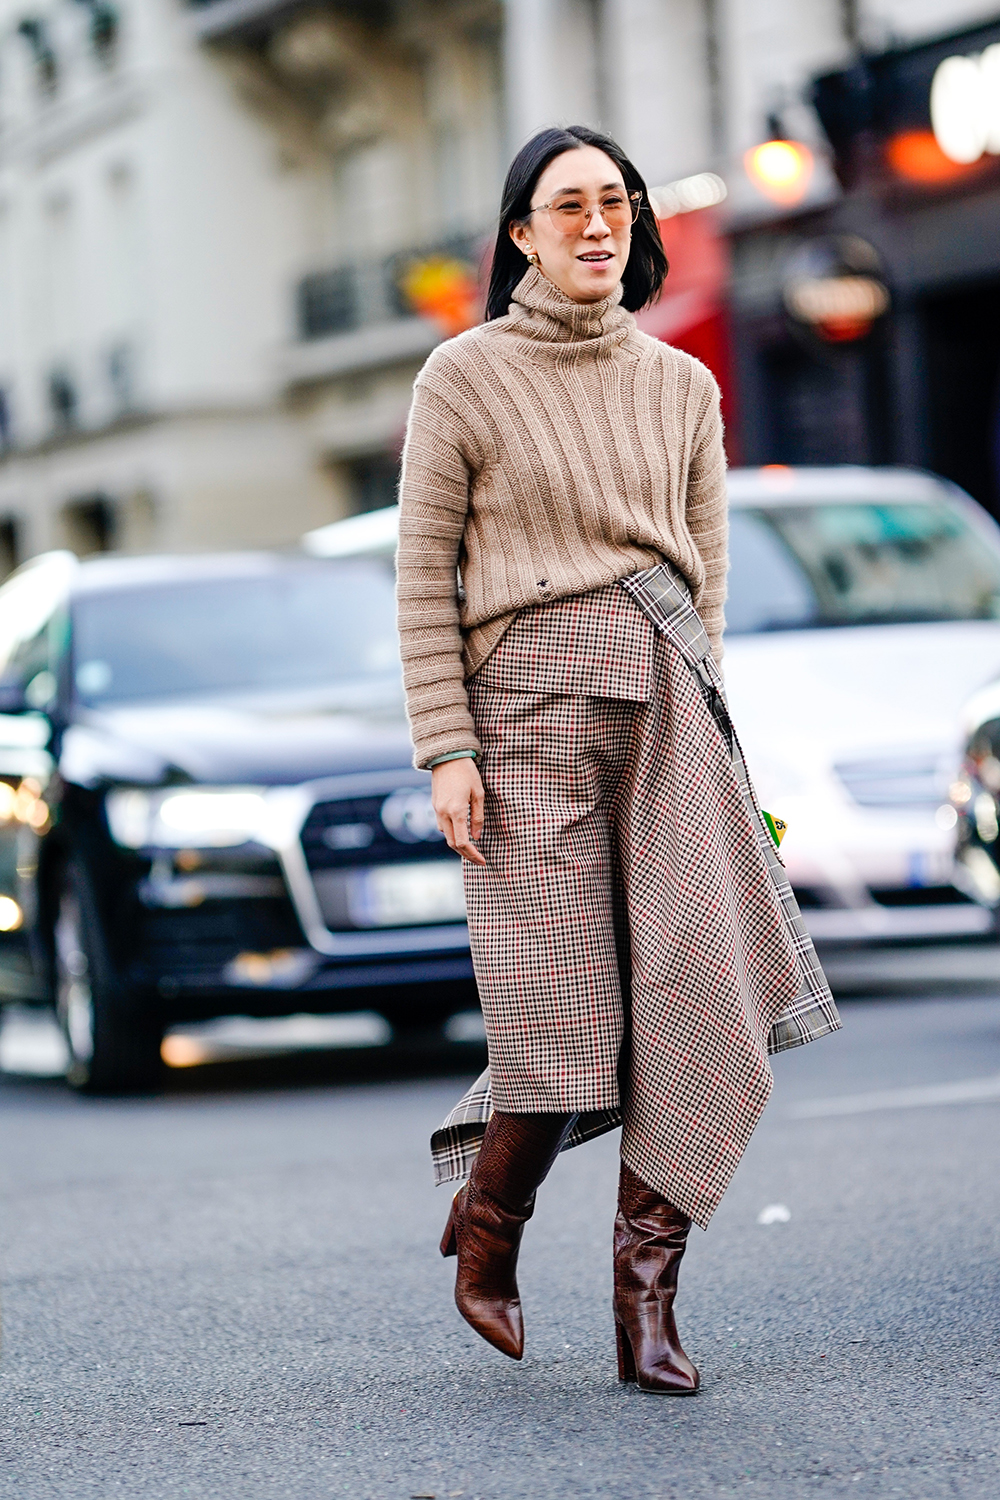 PARIS, FRANCE - SEPTEMBER 24: Eva Chen wears a brown wool turtleneck pullover, a checked printed skirt, brown leather boots, outside Gucci, during Paris Fashion Week Womenswear Spring/Summer 2019, on September 24, 2018 in Paris, France. (Photo by Edward Berthelot/Getty Images)